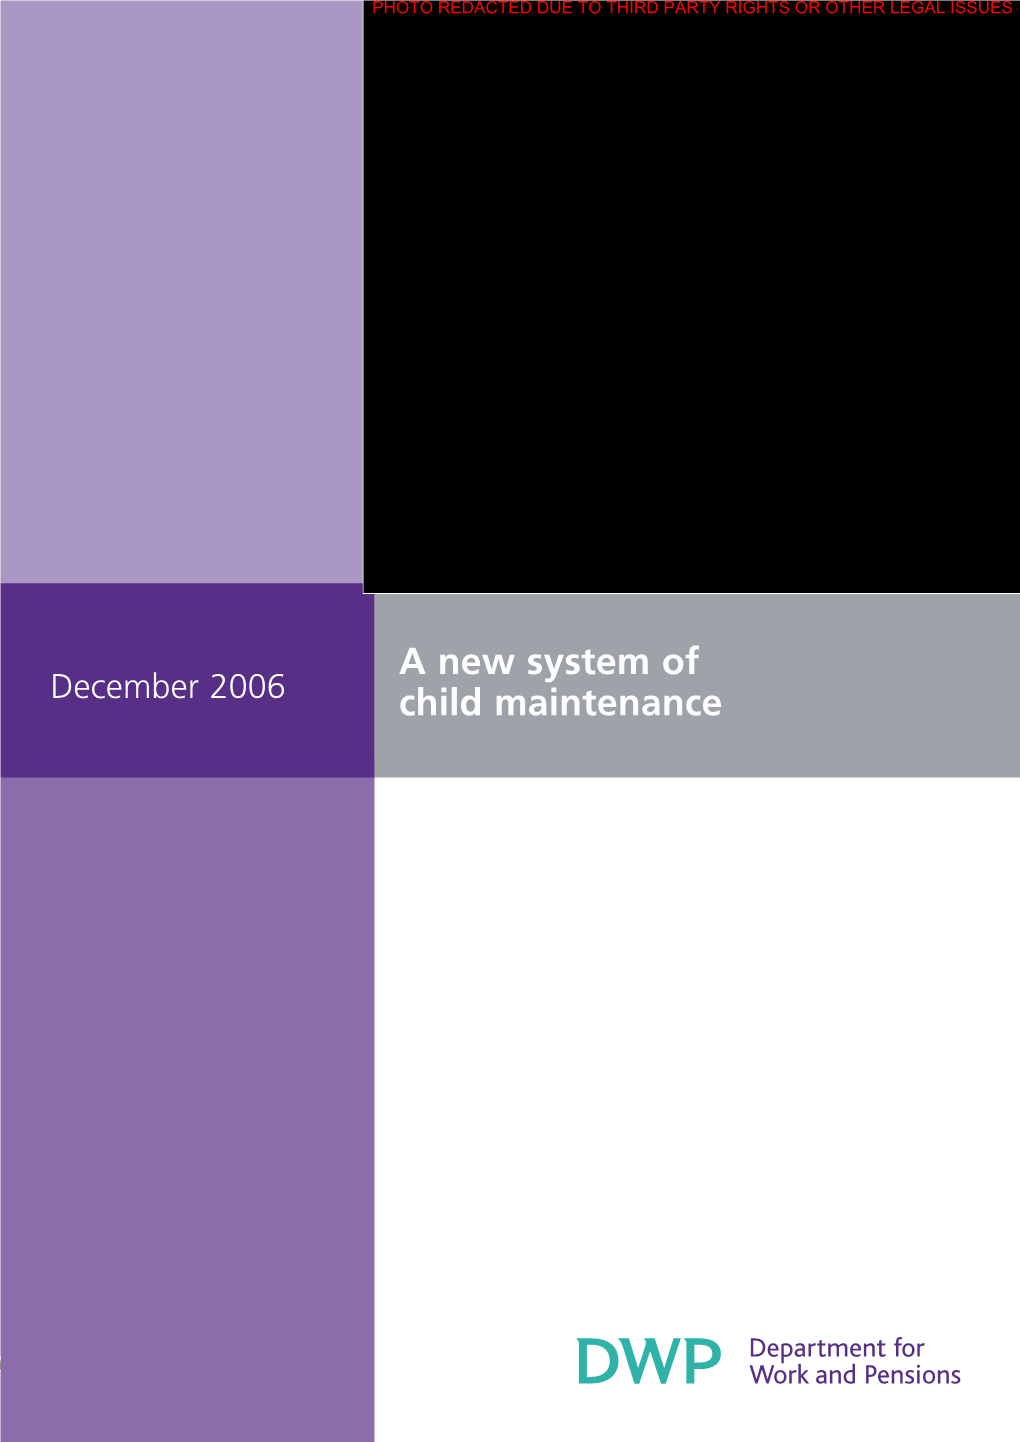 A New System of Child Maintenance. December 2006